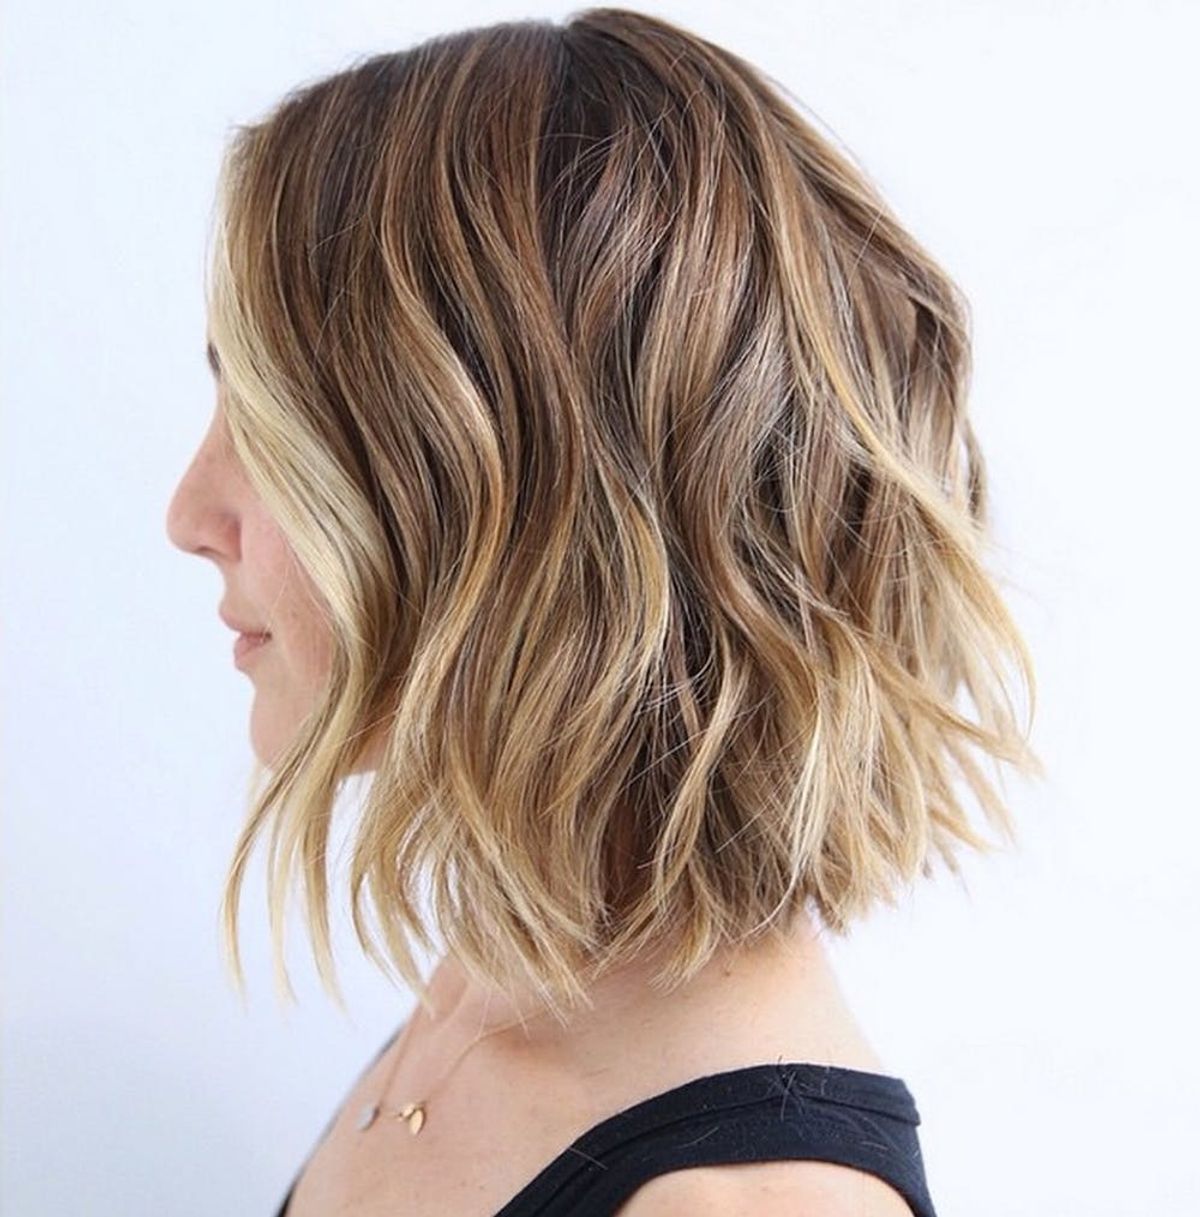 This Is the Hairstylist Trick for Getting Your Dye Job to Last 6 Months